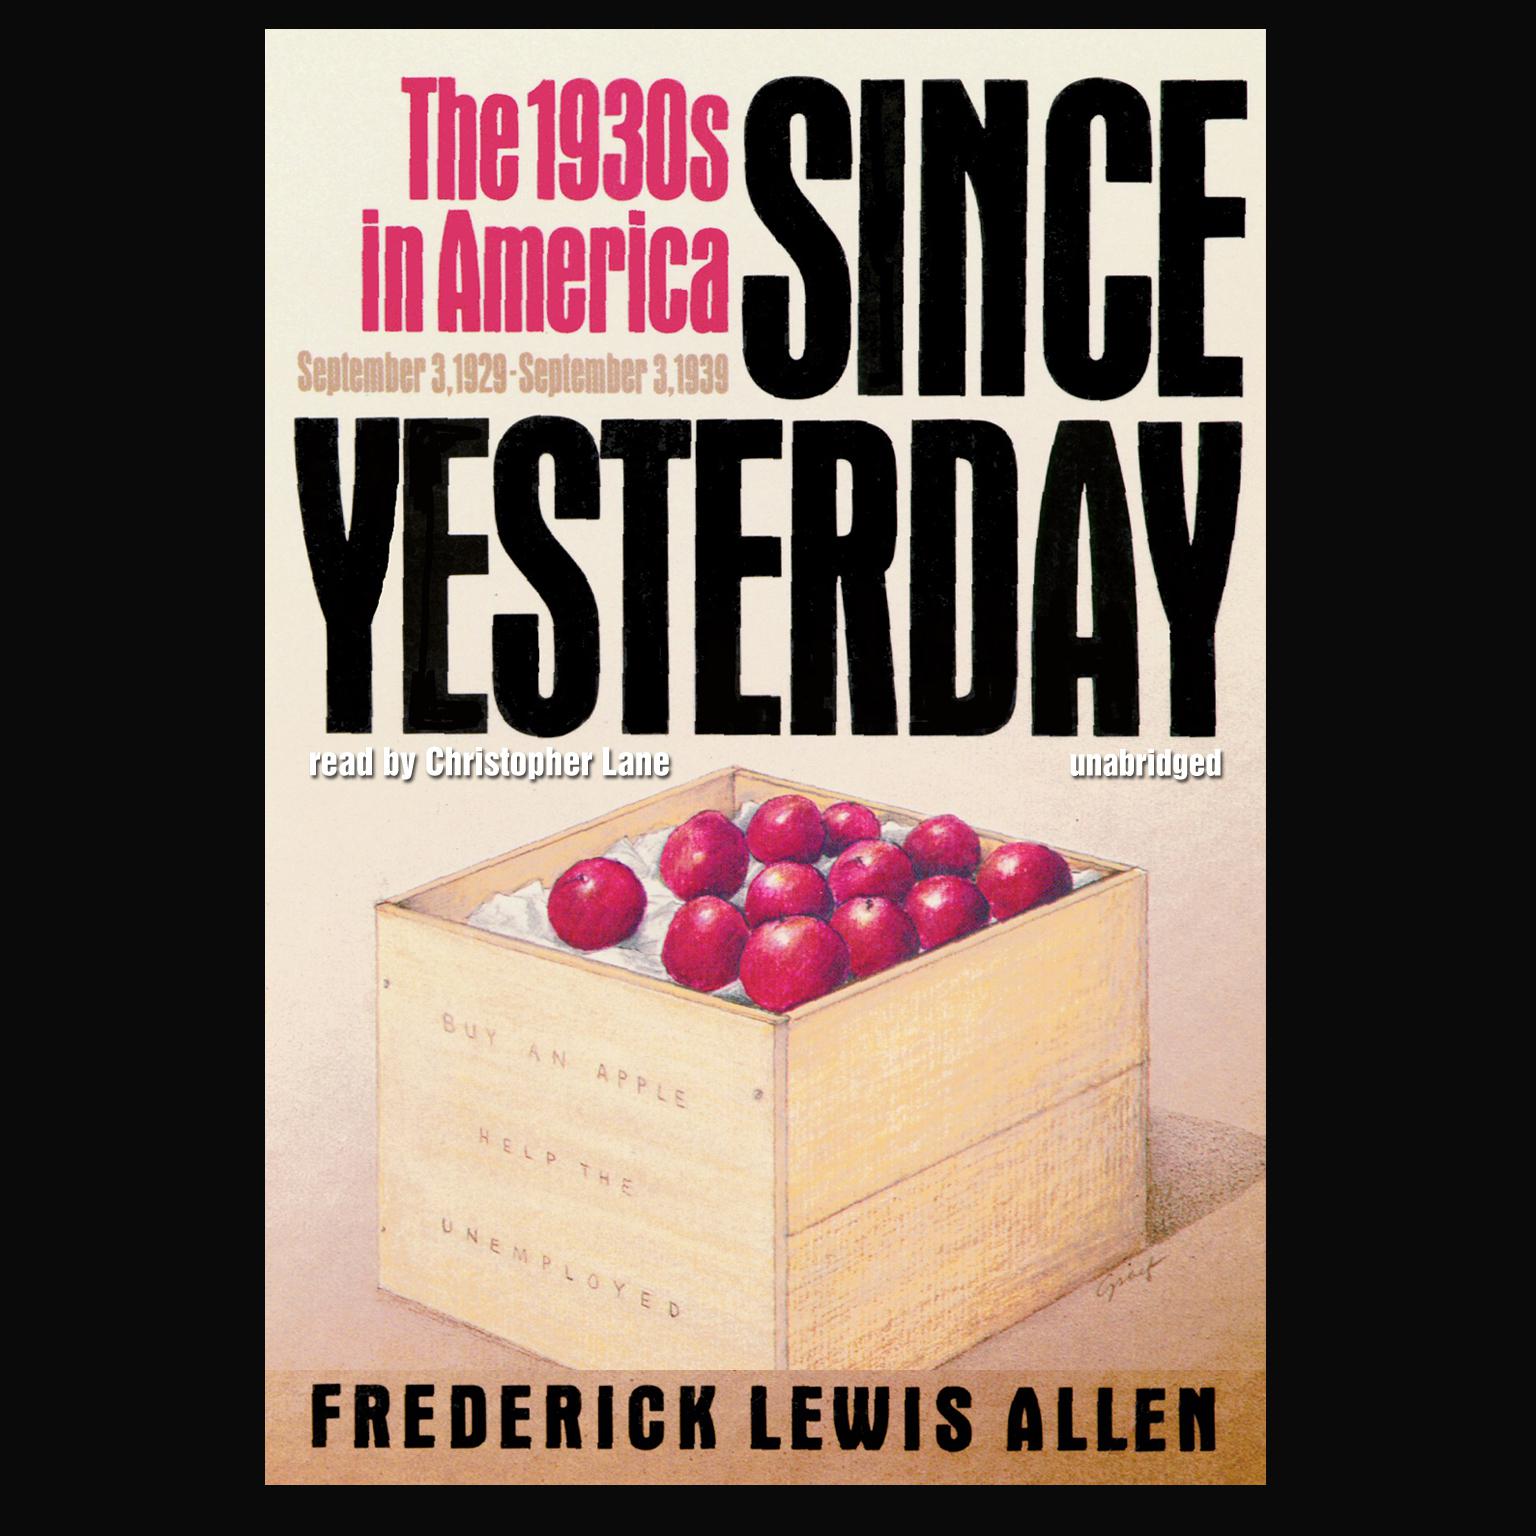 Since Yesterday: The 1930s in America, September 3, 1929–September 3, 1939 Audiobook, by Frederick Lewis Allen